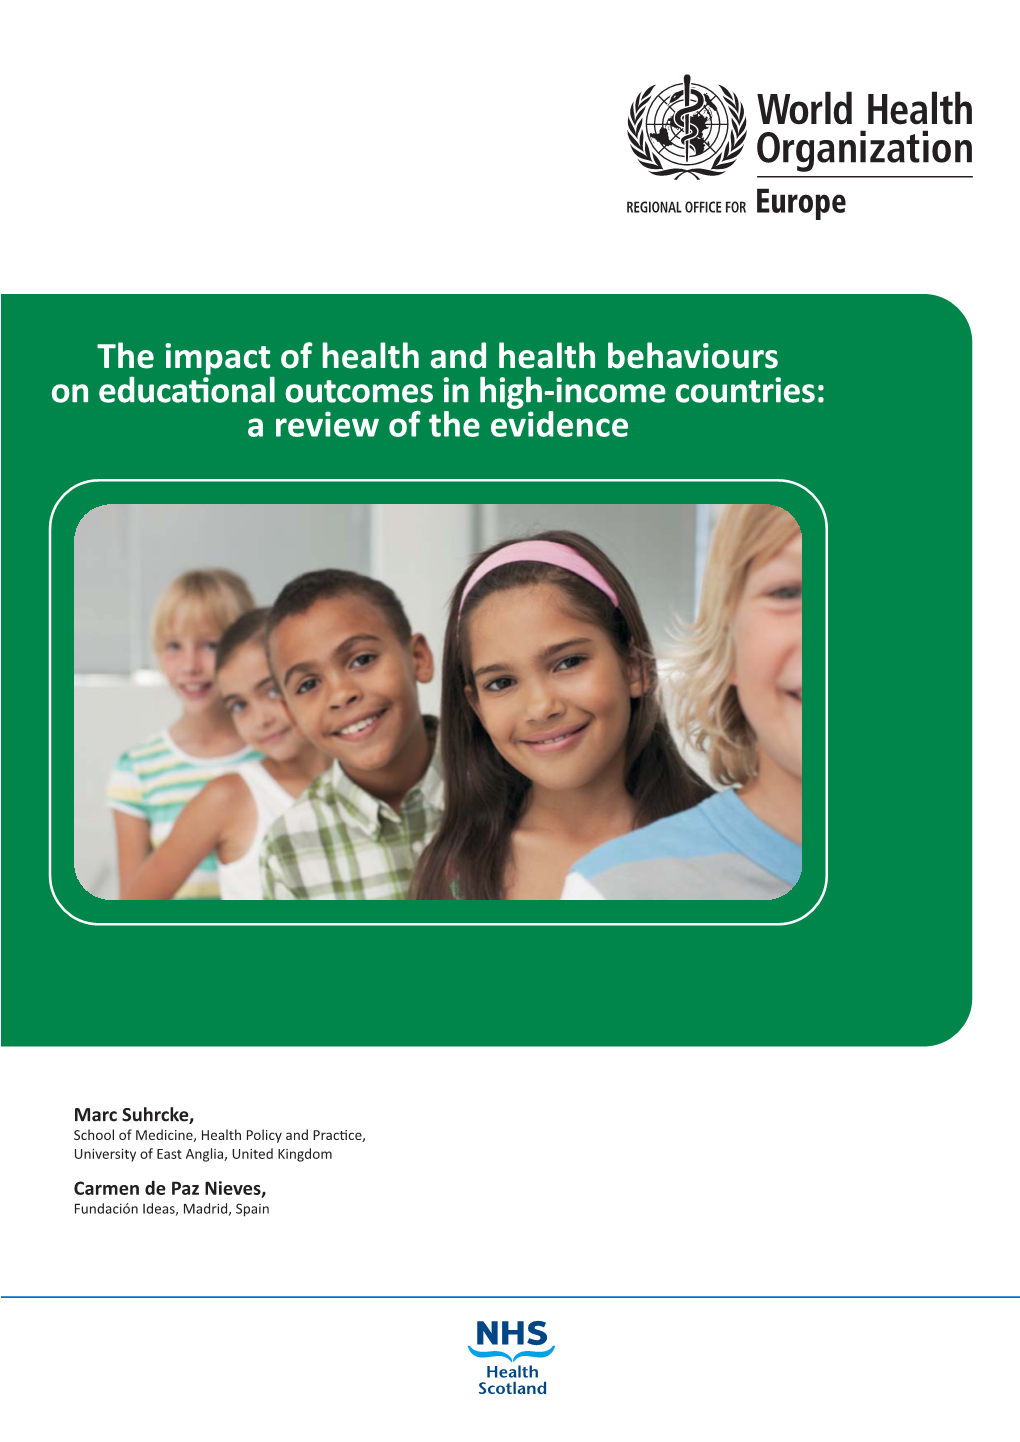 The Impact of Health and Health Behaviours on Educational Outcomes in High-Income Countries: a Review of the Evidence